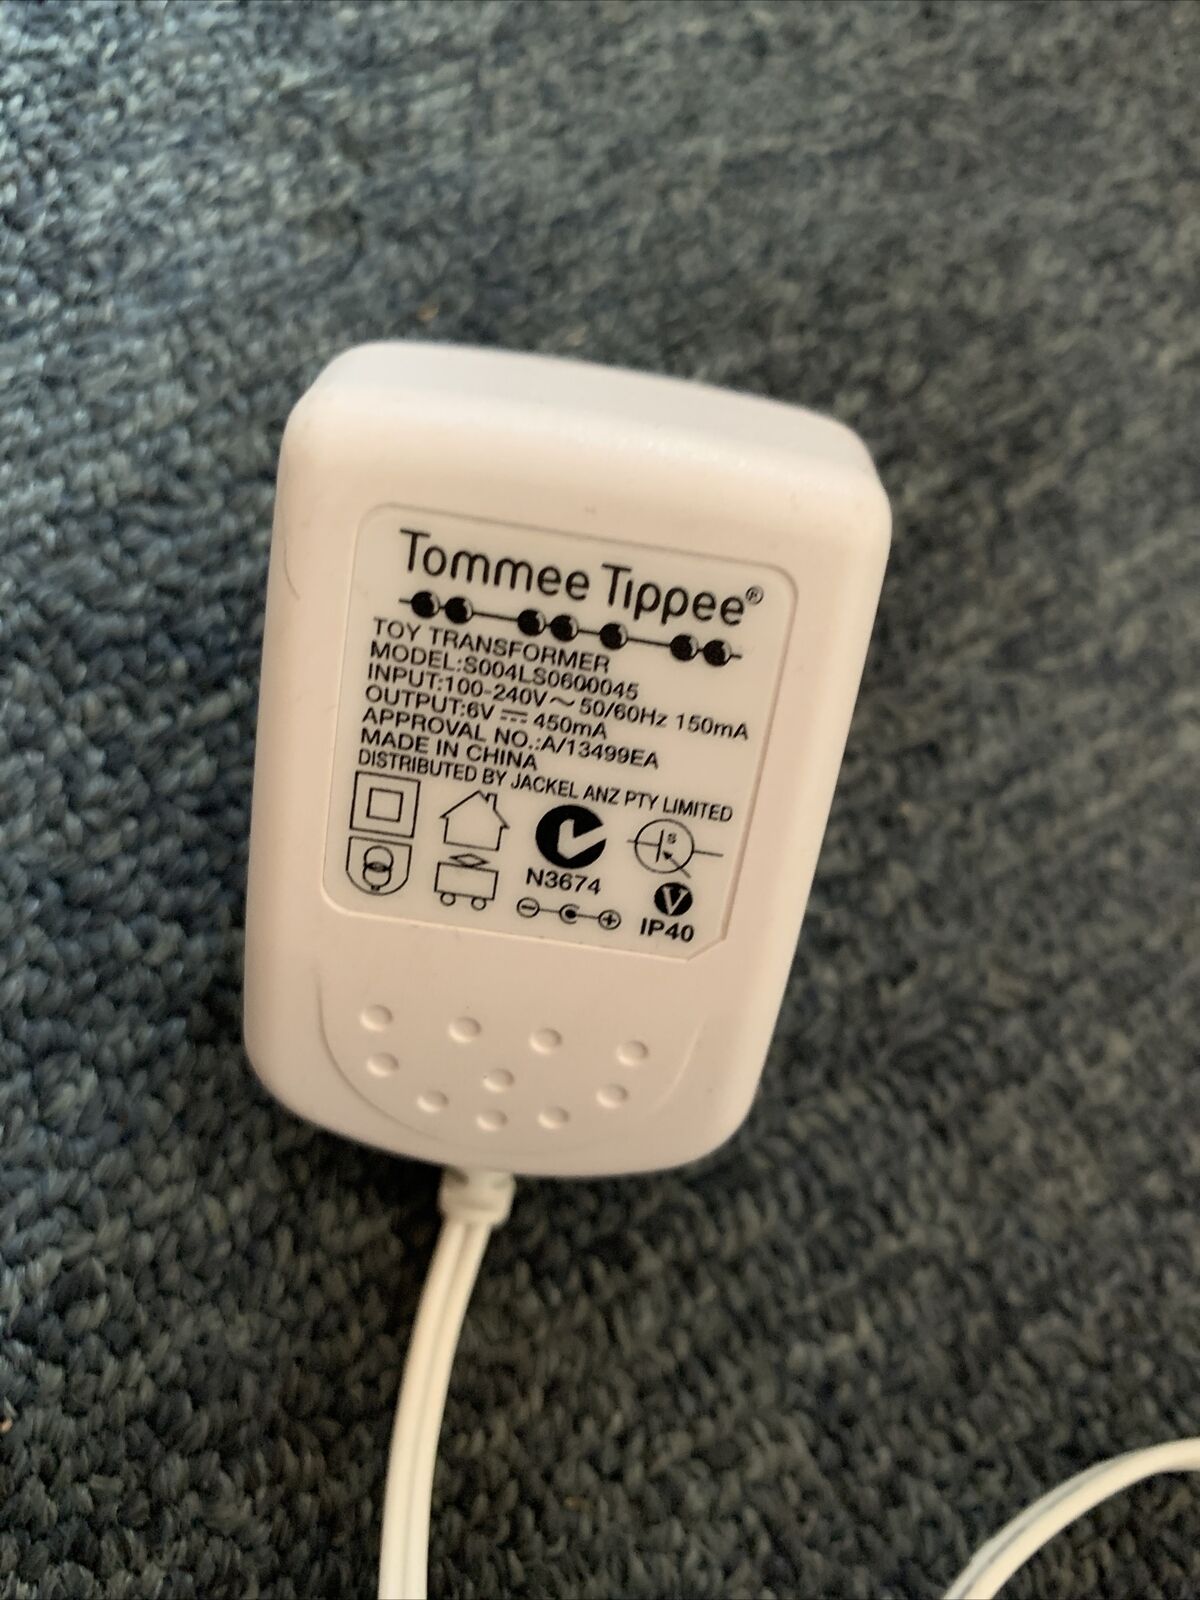 Tommee Tippee Toy Transformer S004LS0600045 AC Adapter 6V 450mA Colour: White Compatible Brand: - Click Image to Close